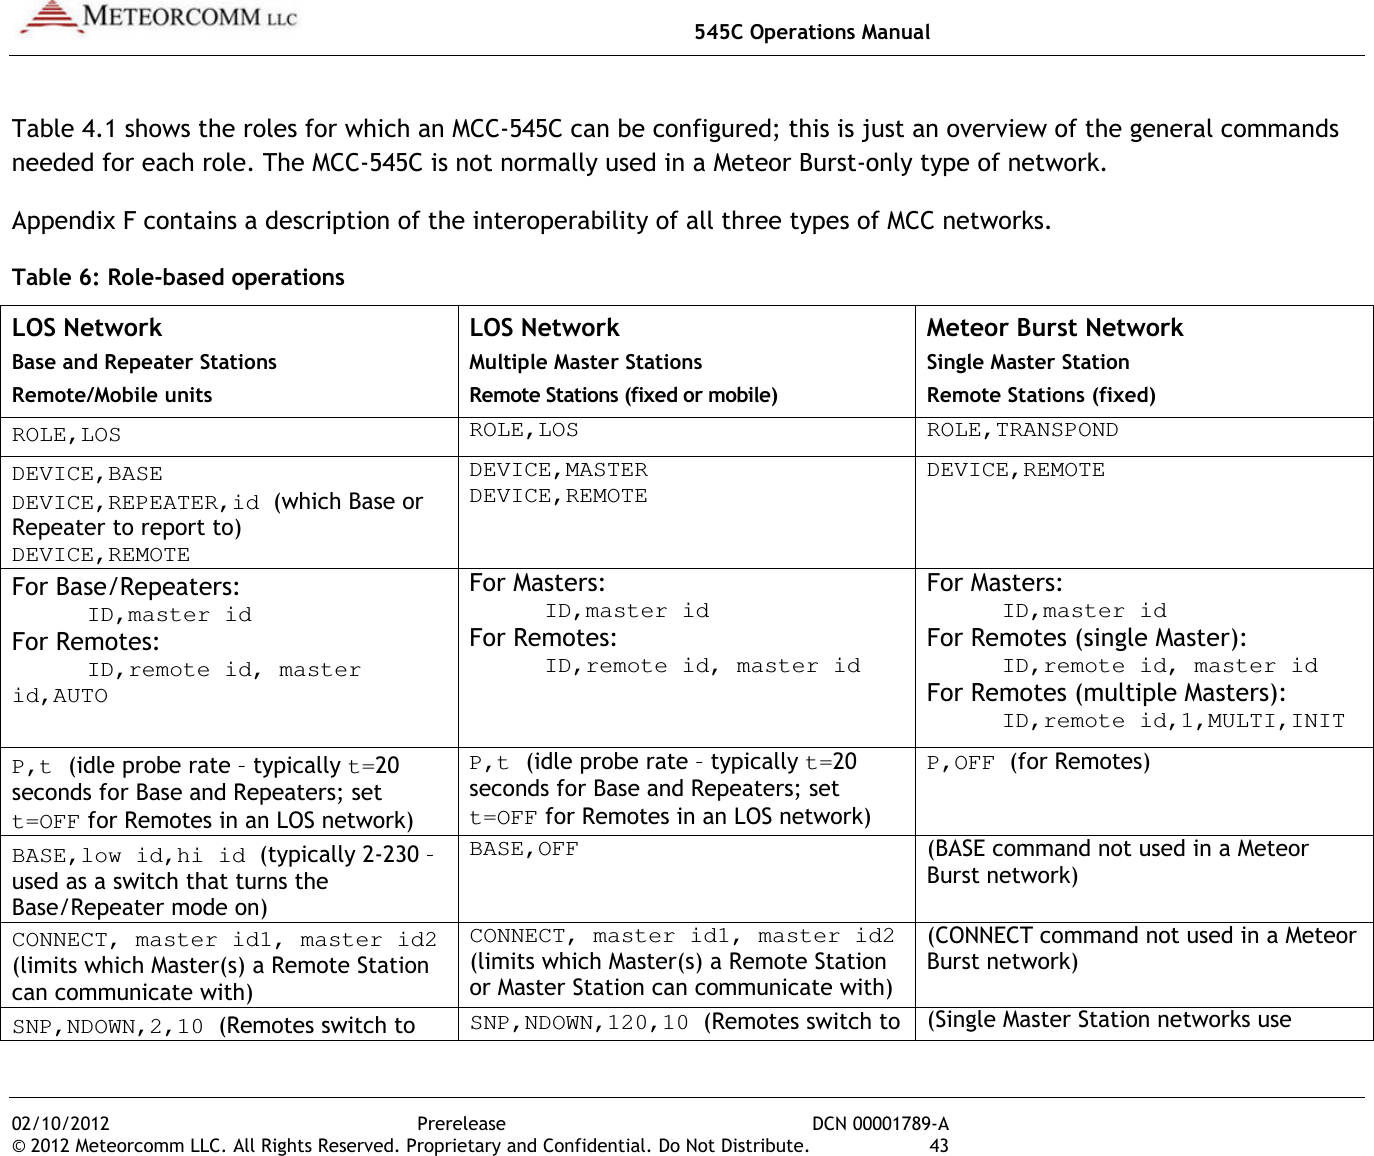   545C Operations Manual 02/10/2012  Prerelease  DCN 00001789-A © 2012 Meteorcomm LLC. All Rights Reserved. Proprietary and Confidential. Do Not Distribute.  43 Table 4.1 shows the roles for which an MCC-545C can be configured; this is just an overview of the general commands needed for each role. The MCC-545C is not normally used in a Meteor Burst-only type of network. Appendix F contains a description of the interoperability of all three types of MCC networks. Table 6: Role-based operations LOS Network Base and Repeater Stations Remote/Mobile units LOS Network Multiple Master Stations Remote Stations (fixed or mobile) Meteor Burst Network Single Master Station Remote Stations (fixed) ROLE,LOS  ROLE,LOS  ROLE,TRANSPOND DEVICE,BASE DEVICE,REPEATER,id (which Base or Repeater to report to) DEVICE,REMOTE DEVICE,MASTER DEVICE,REMOTE DEVICE,REMOTE For Base/Repeaters:   ID,master id For Remotes:   ID,remote id, master id,AUTO For Masters:   ID,master id For Remotes:   ID,remote id, master id For Masters:   ID,master id For Remotes (single Master):   ID,remote id, master id For Remotes (multiple Masters):   ID,remote id,1,MULTI,INIT P,t (idle probe rate – typically t=20 seconds for Base and Repeaters; set t=OFF for Remotes in an LOS network) P,t (idle probe rate – typically t=20 seconds for Base and Repeaters; set t=OFF for Remotes in an LOS network) P,OFF (for Remotes) BASE,low id,hi id (typically 2-230 – used as a switch that turns the Base/Repeater mode on) BASE,OFF (BASE command not used in a Meteor Burst network) CONNECT, master id1, master id2 (limits which Master(s) a Remote Station can communicate with) CONNECT, master id1, master id2 (limits which Master(s) a Remote Station or Master Station can communicate with) (CONNECT command not used in a Meteor Burst network) SNP,NDOWN,2,10 (Remotes switch to  SNP,NDOWN,120,10 (Remotes switch to (Single Master Station networks use 